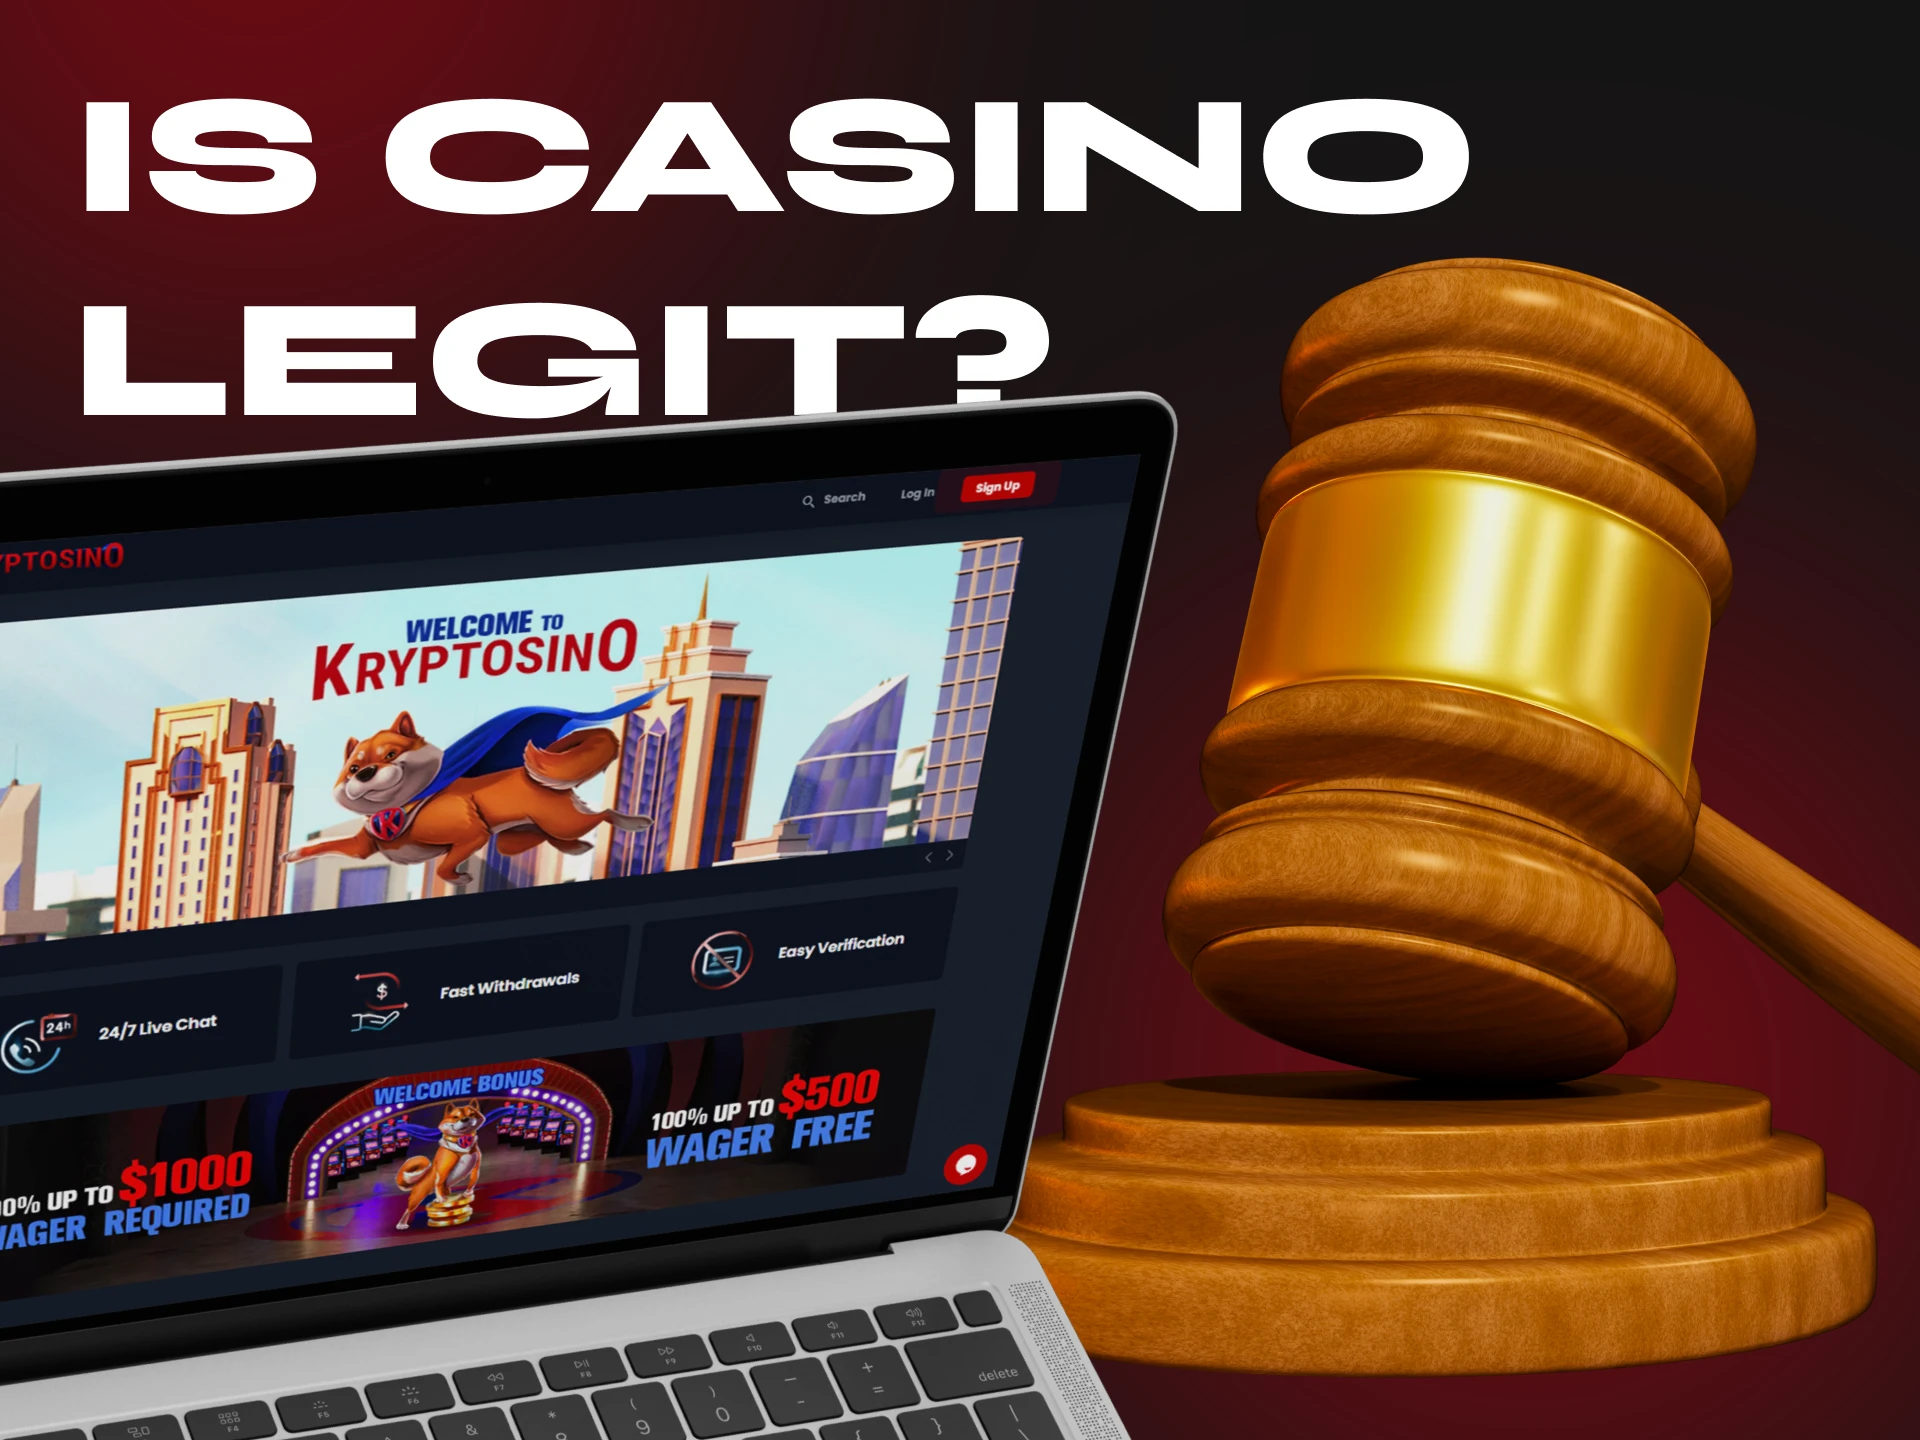 Placing bets at Kryptosino Casino is legal for its users.